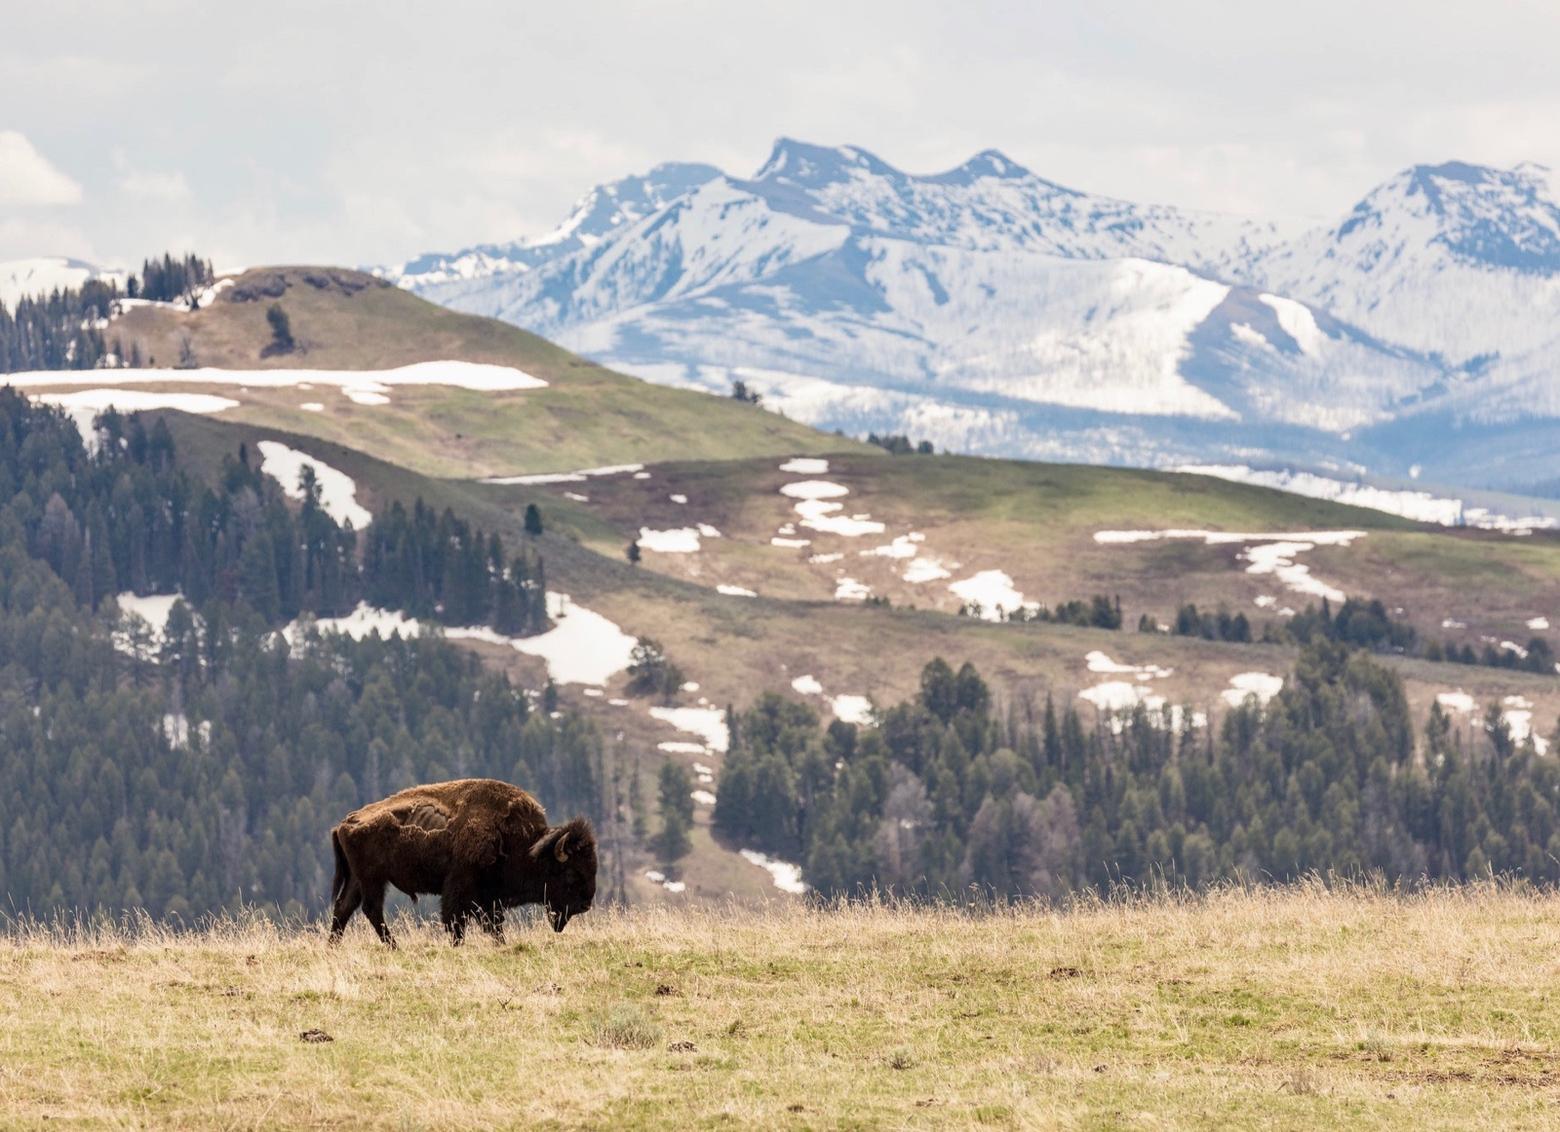 A bison in Yellowstone, descended from a small number of genetically-pure survivors that found refuge in the national park following the annihilation of 30 million in the American West.  What's the value of keeping a species alive beyond economics and ledger sheets?  Photo courtesy Jacob W. Frank/NPS